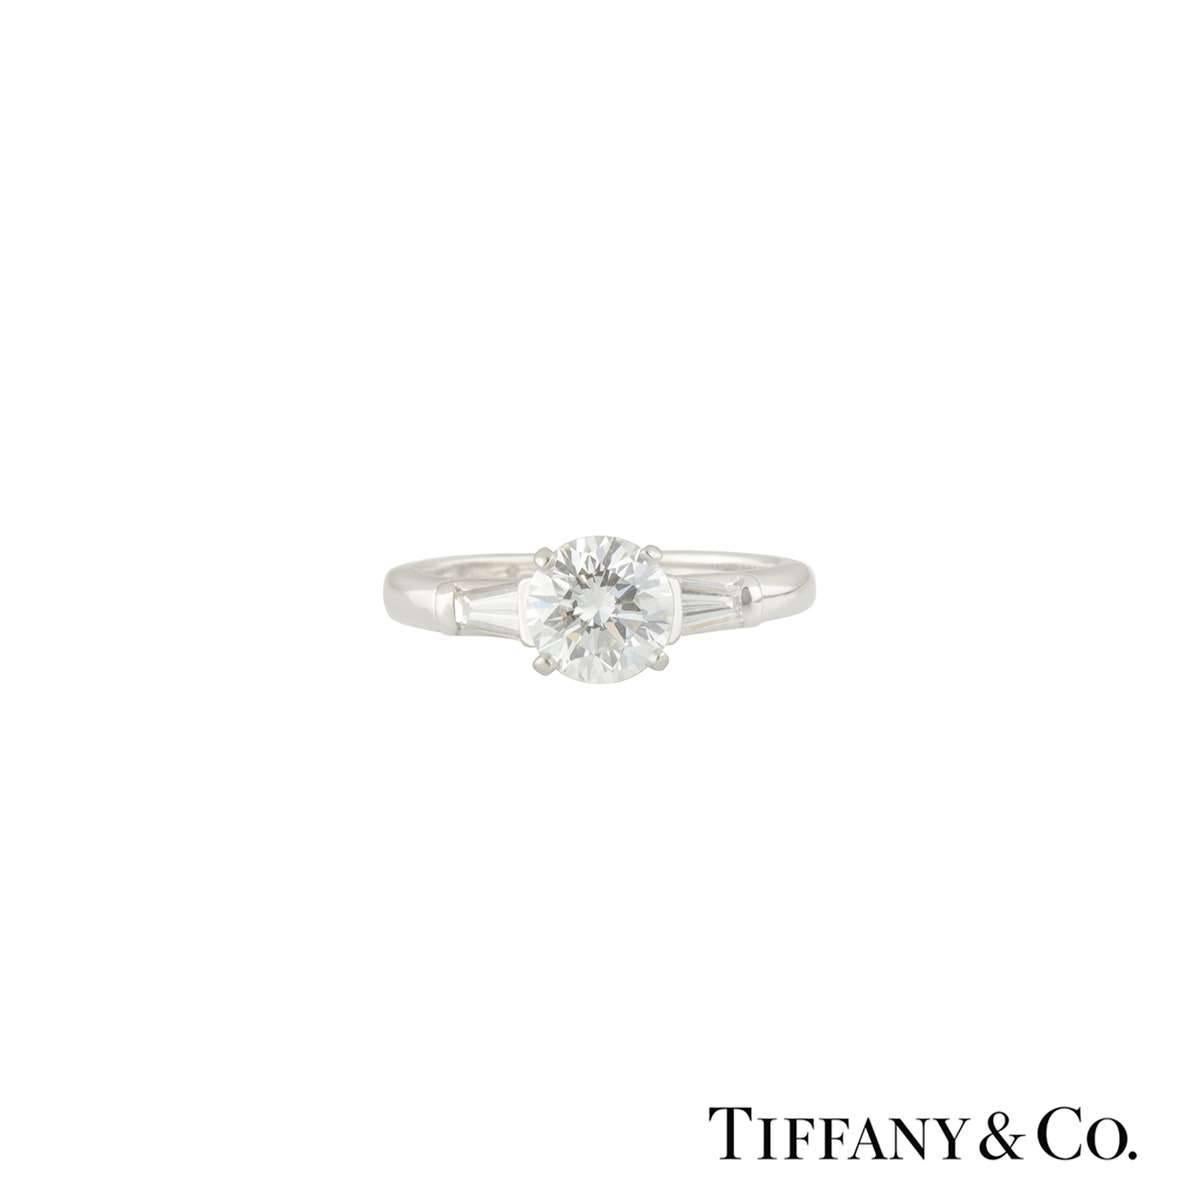 A stunning Tiffany & Co. diamond platinum engagement ring from the Three Stone collection. The ring comprises of a single round brilliant cut diamond in a 4 claw setting with a total weight of 1.17ct, H colour and VVS2 clarity. Flanked by two